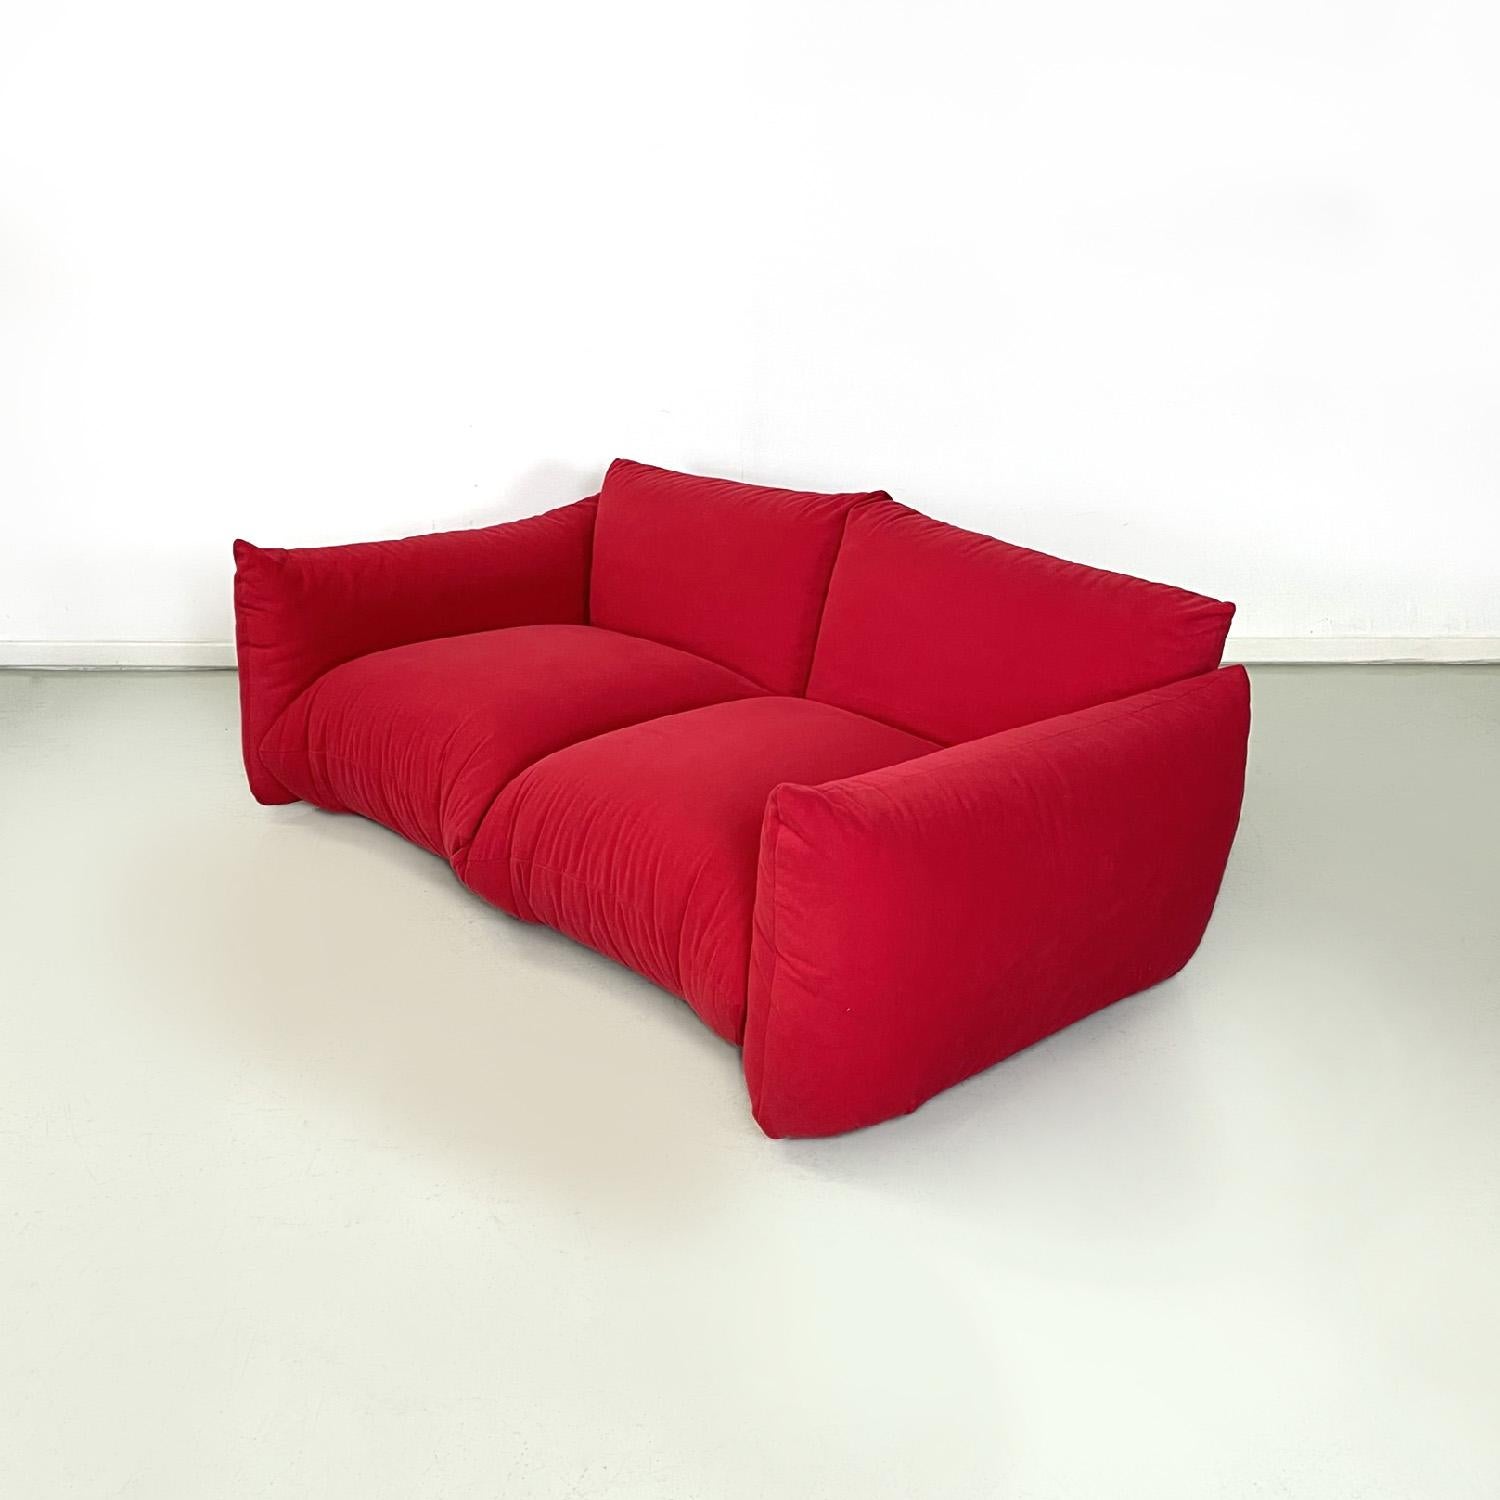 Italian modern red sofa Marenco by Mario Marenco for Arflex, 1970s
Red sofa mod. Marenco. The rectangular seat of the sofa is made up of two padded cushions covered in red alcantara type fabric, as is the backrest. The armrests are also padded and